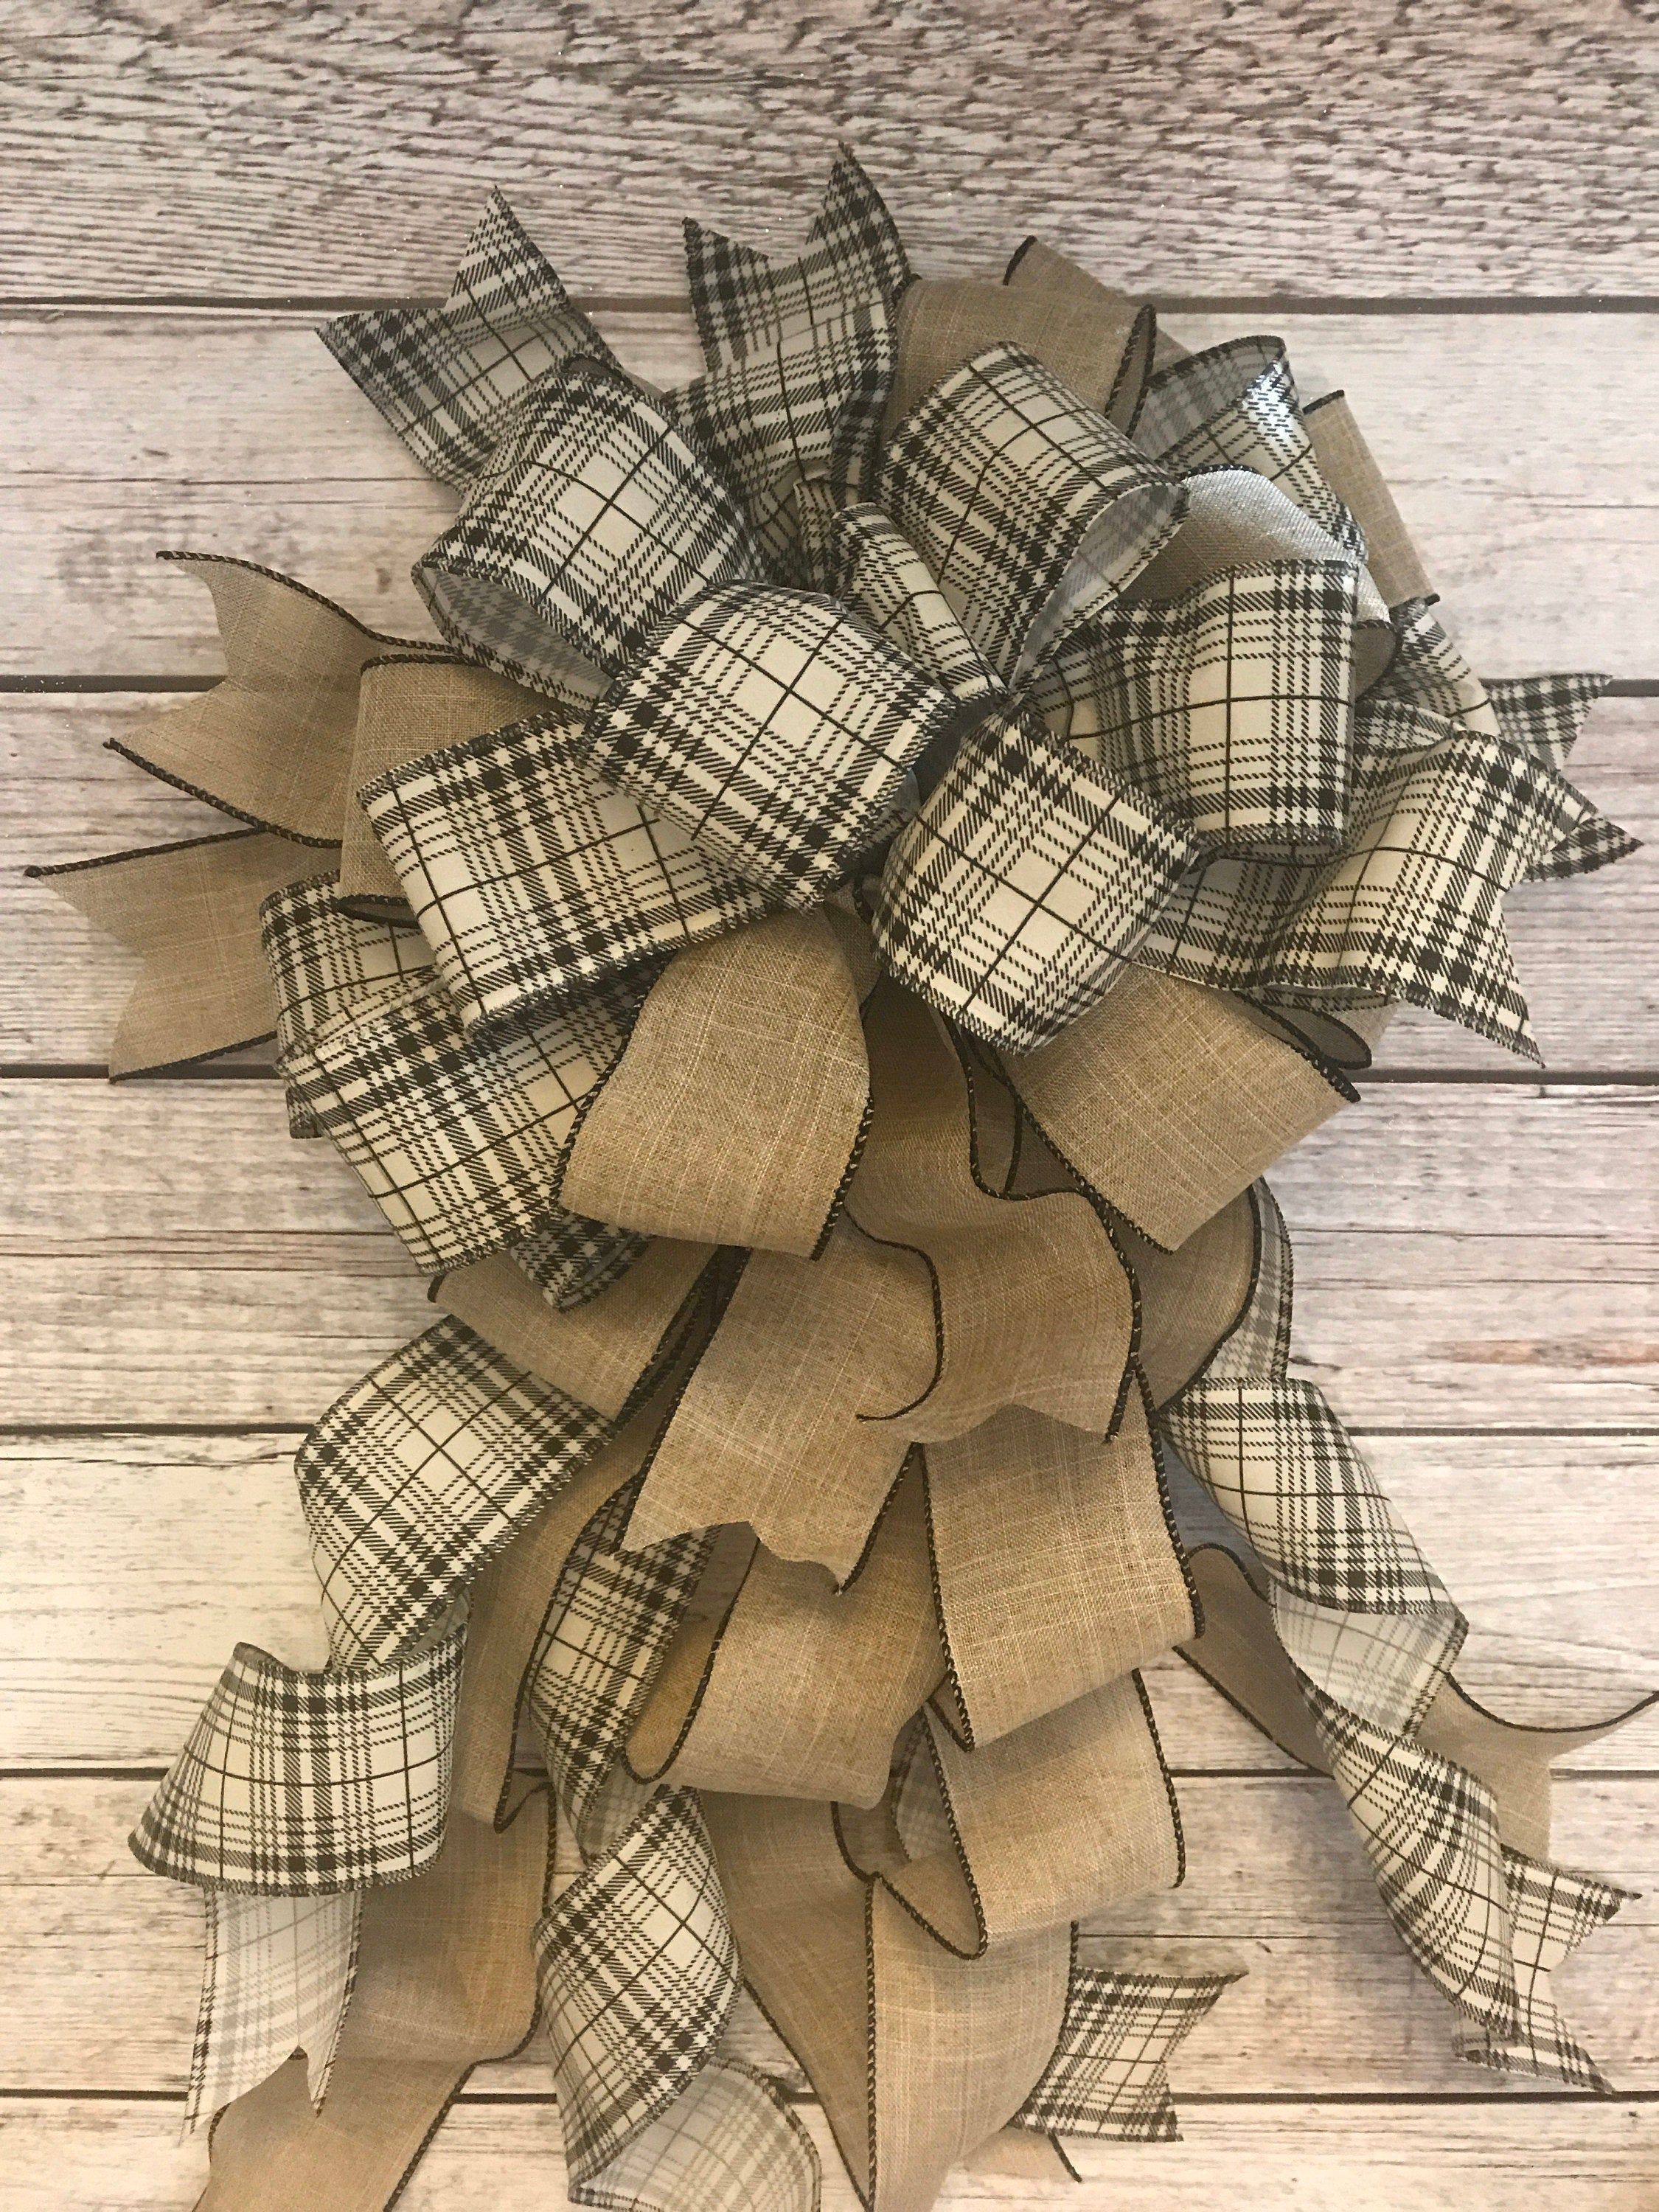 Large Black and White Plaid Burlap Rustic Farmhouse Christmas Bow for Wreath, Tree Topper, Mailbox or Swag -   14 rustic christmas tree topper burlap bows ideas